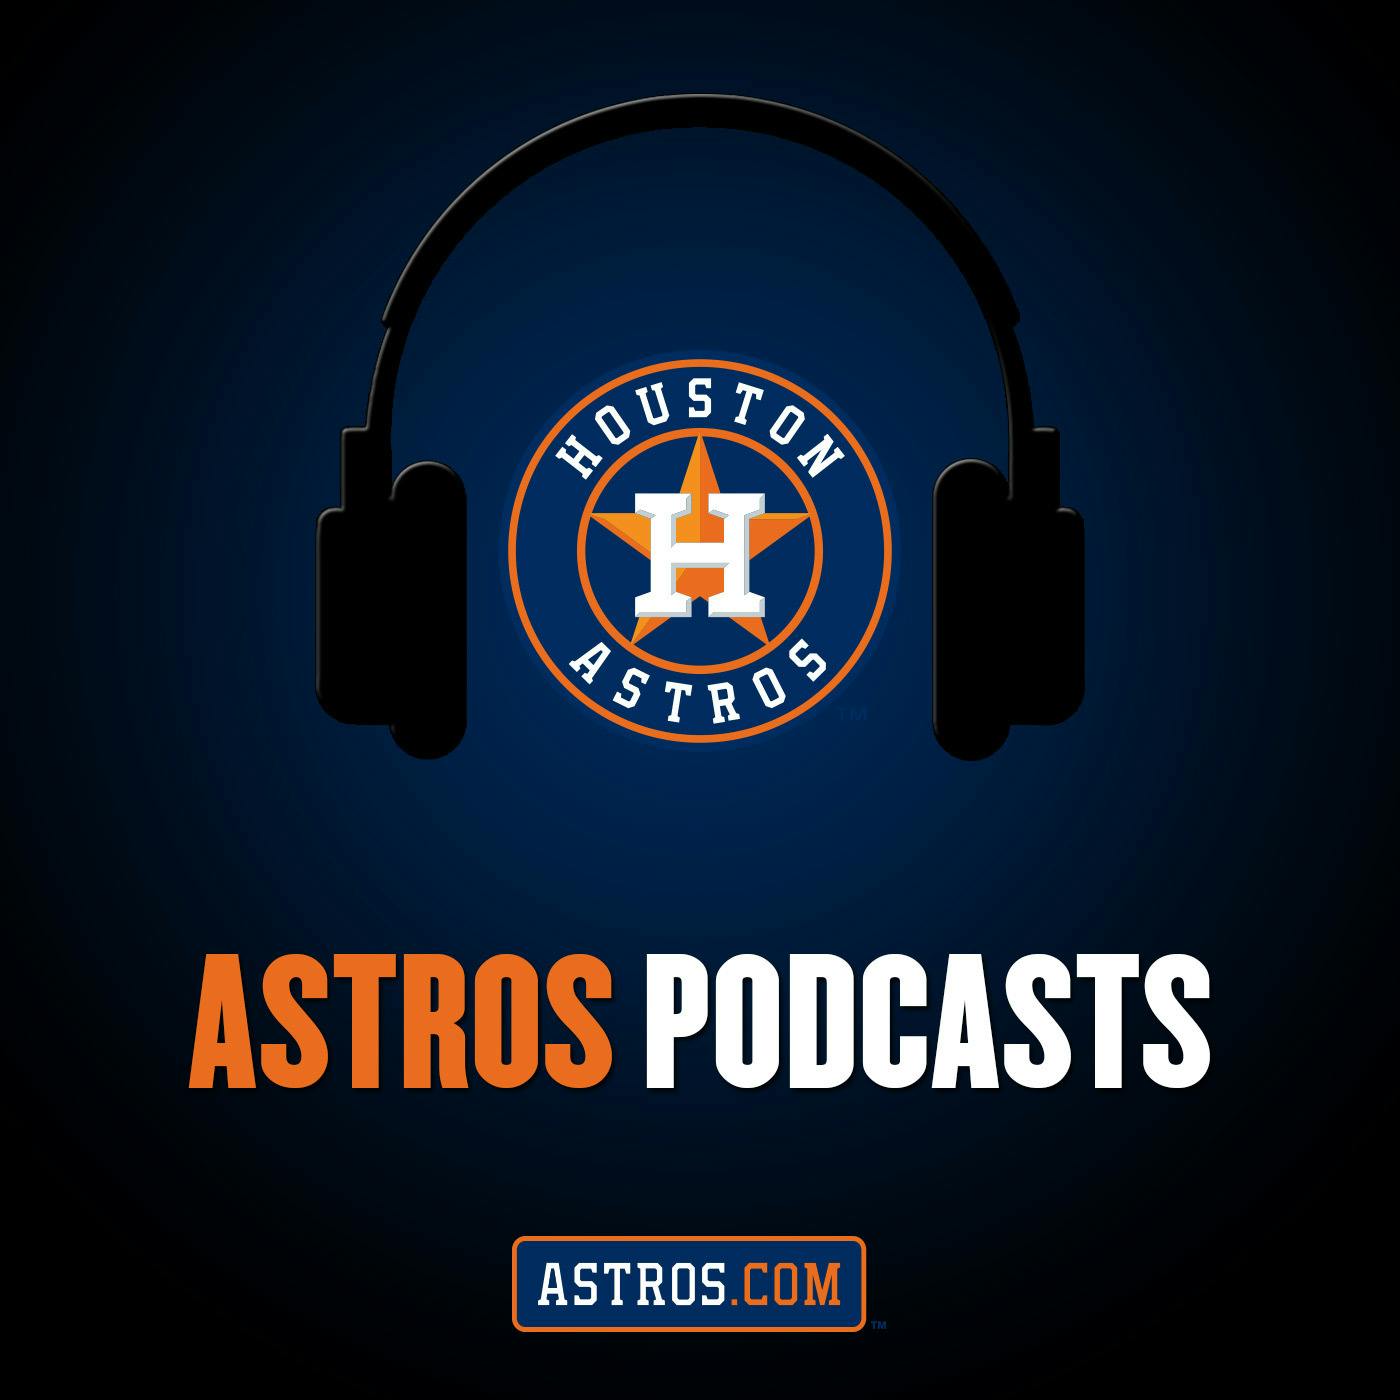 8/11 ASTROCAST presented by KARBACH featuring Dusty Baker, Andre Scrubb, Brooks Raley